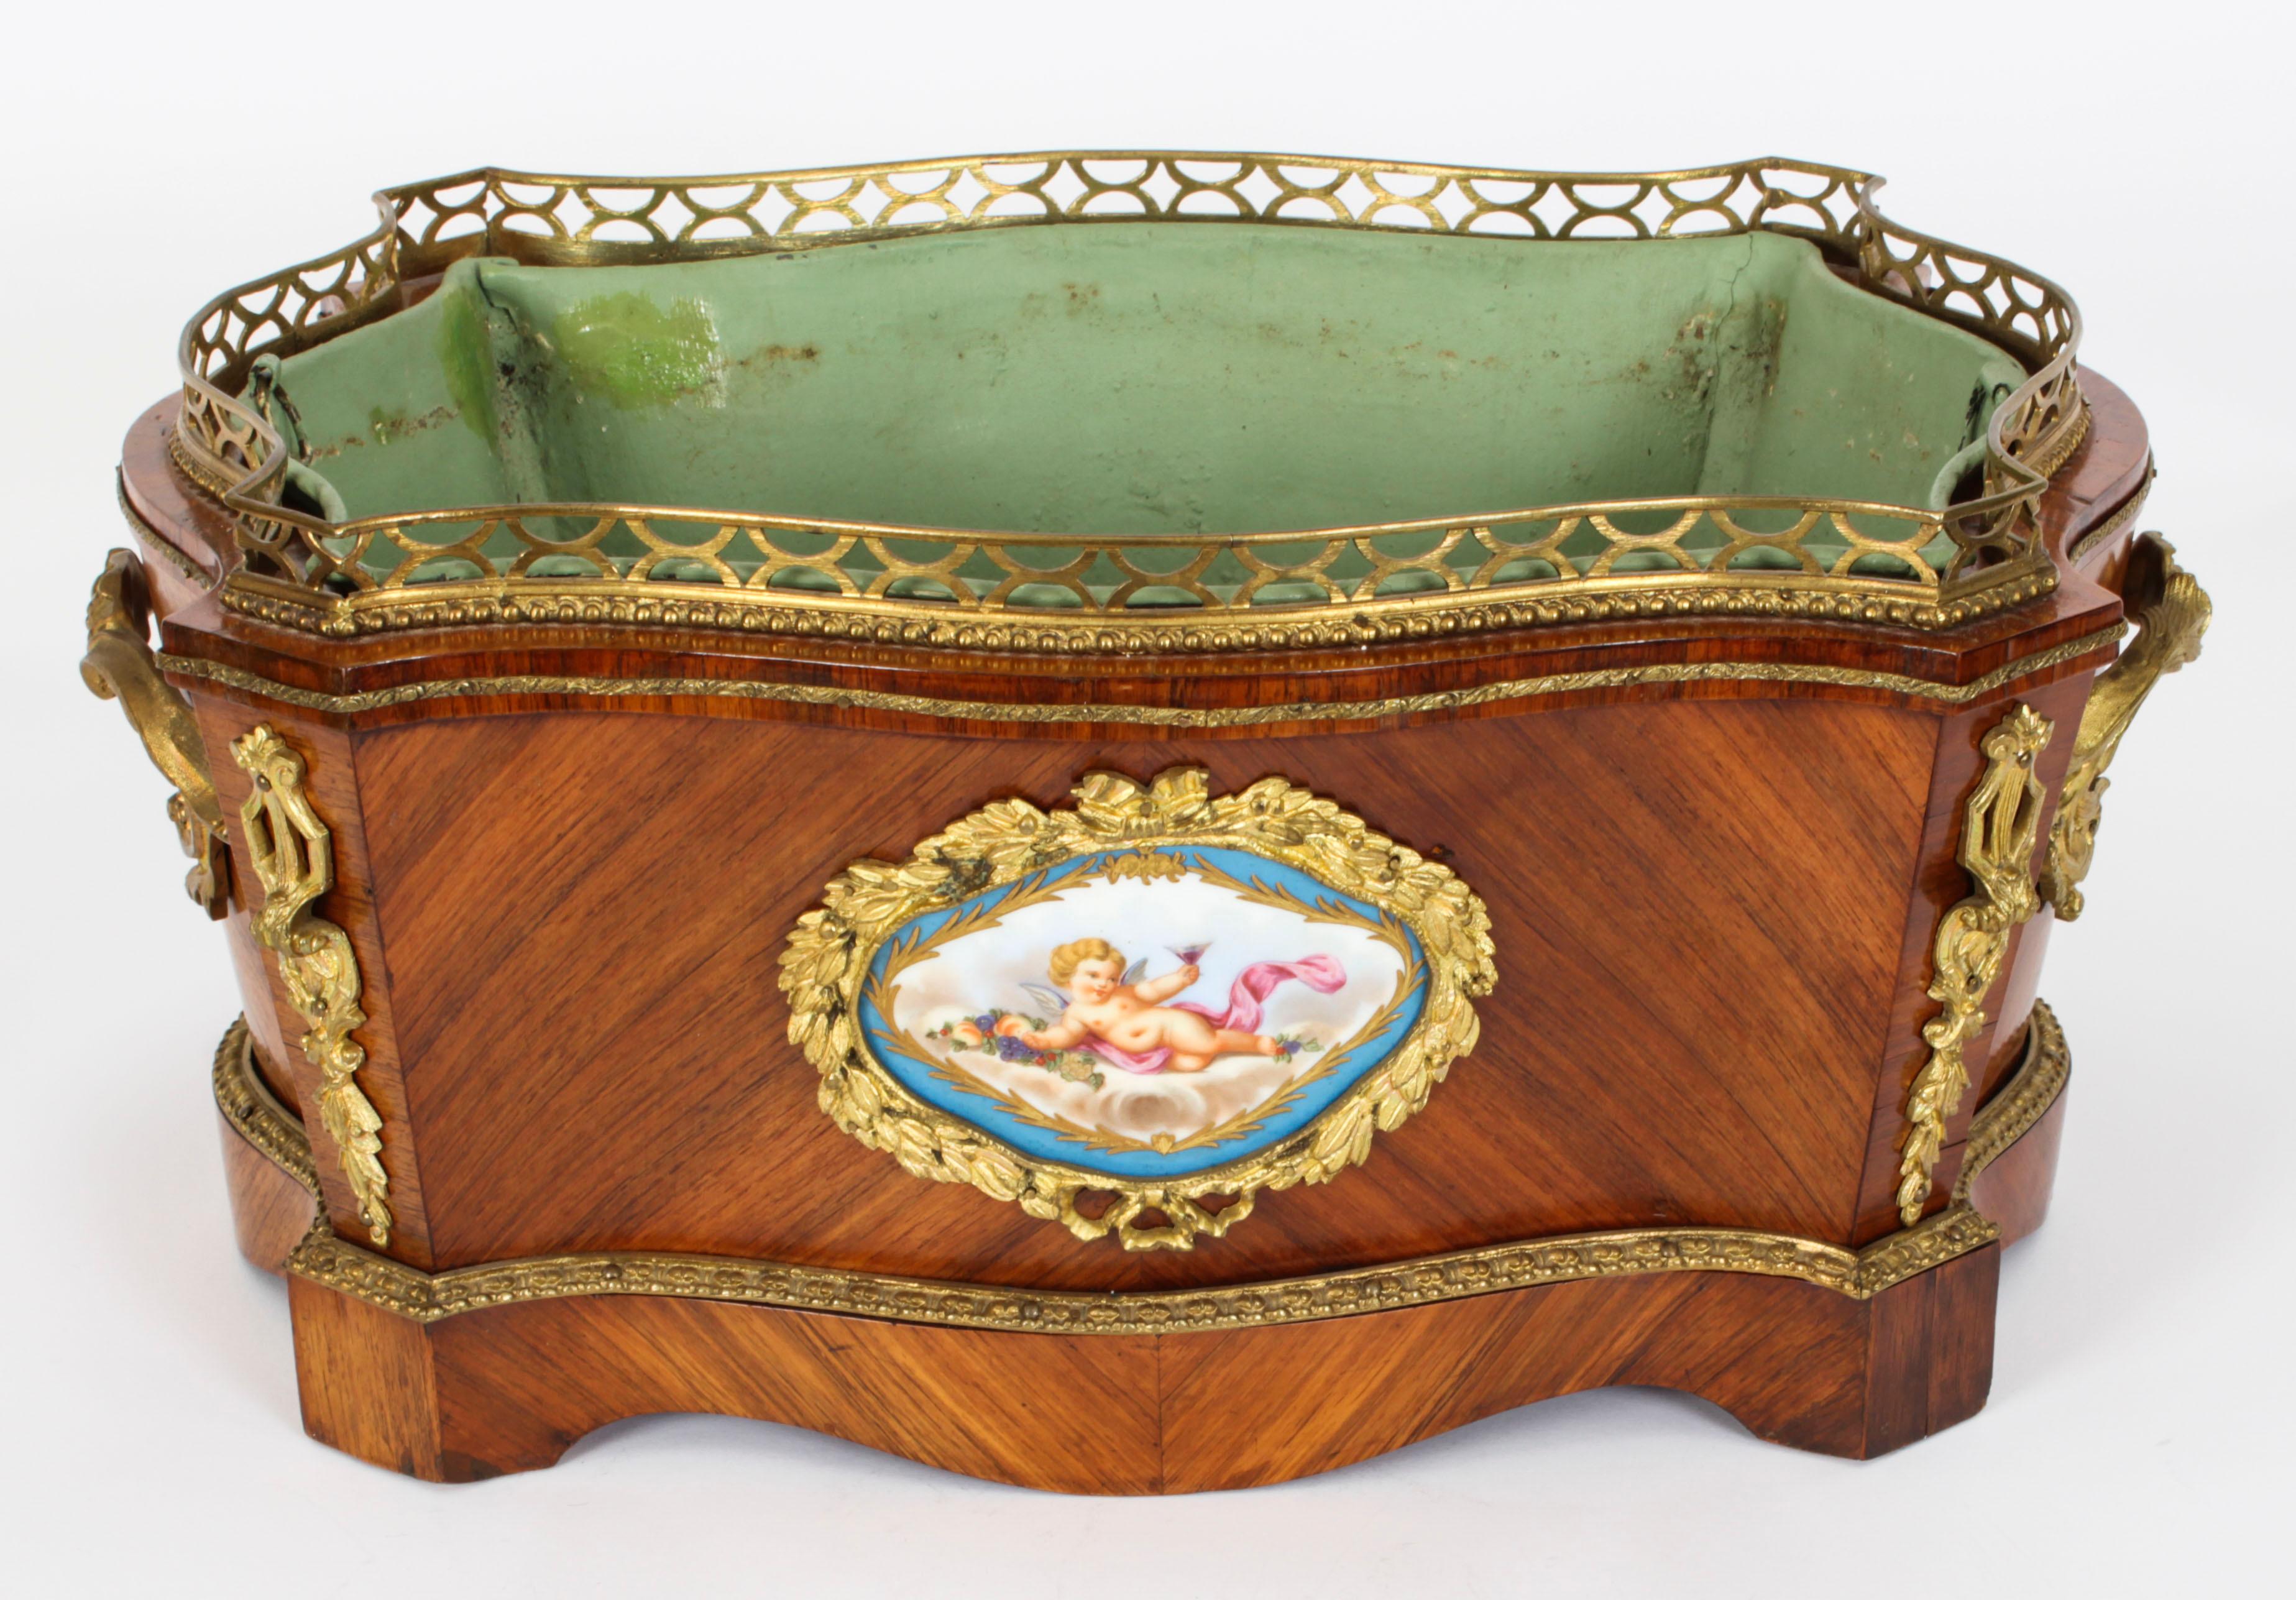 This is a beautiful antique French ormolu and Sevres porcelain mounted wood jardiniere, circa 1860 in date.
 
The jardiniere is serpentine in shape with ormolu mounts enclosing an enchanting hand painted and gilded Sevres porcelain plaque with